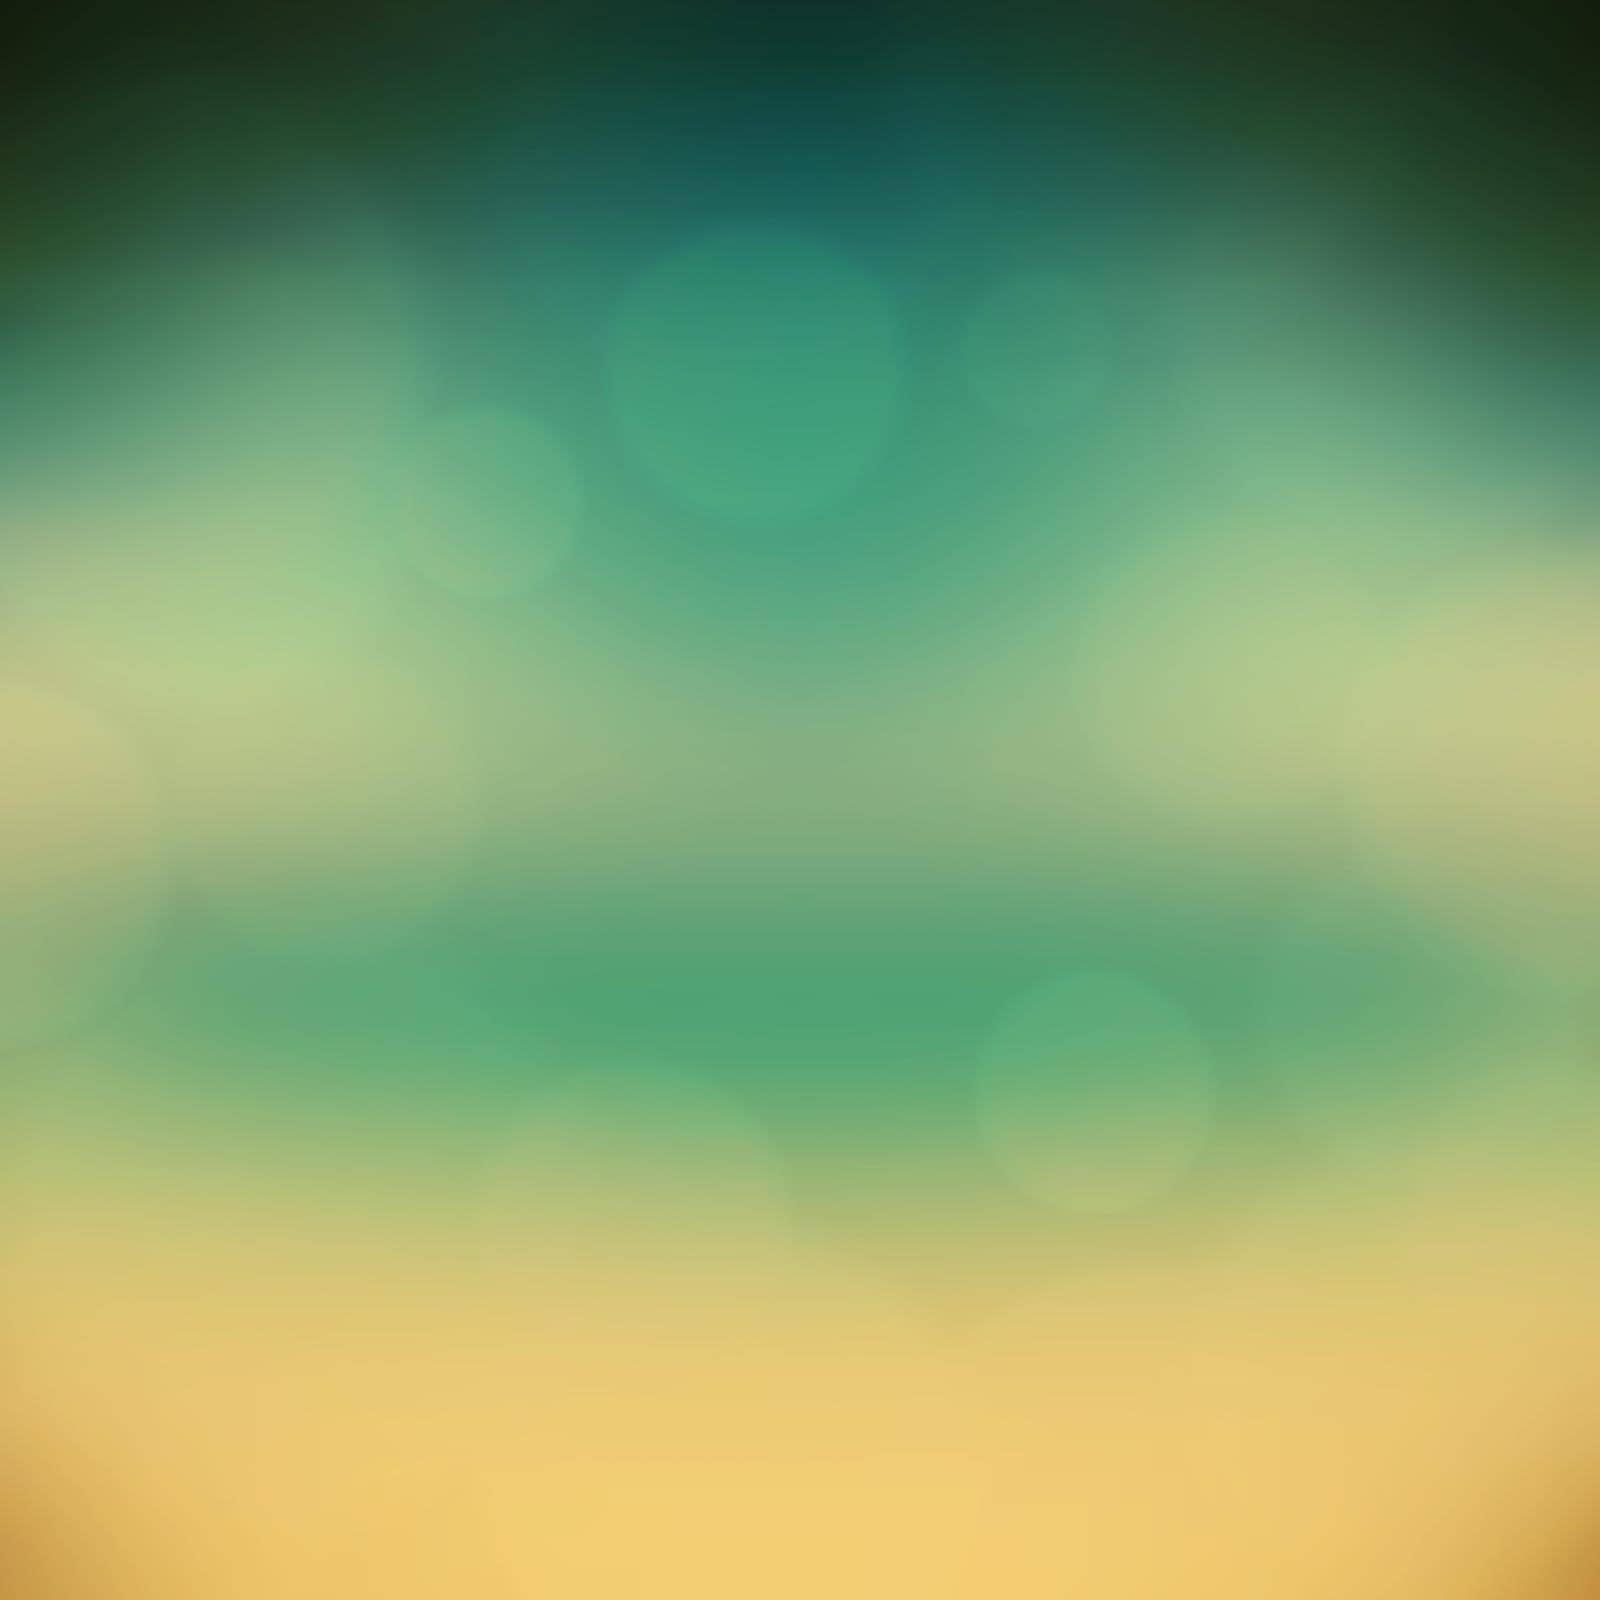 Blurry Green and Yellow Abstract Background by ProVectors